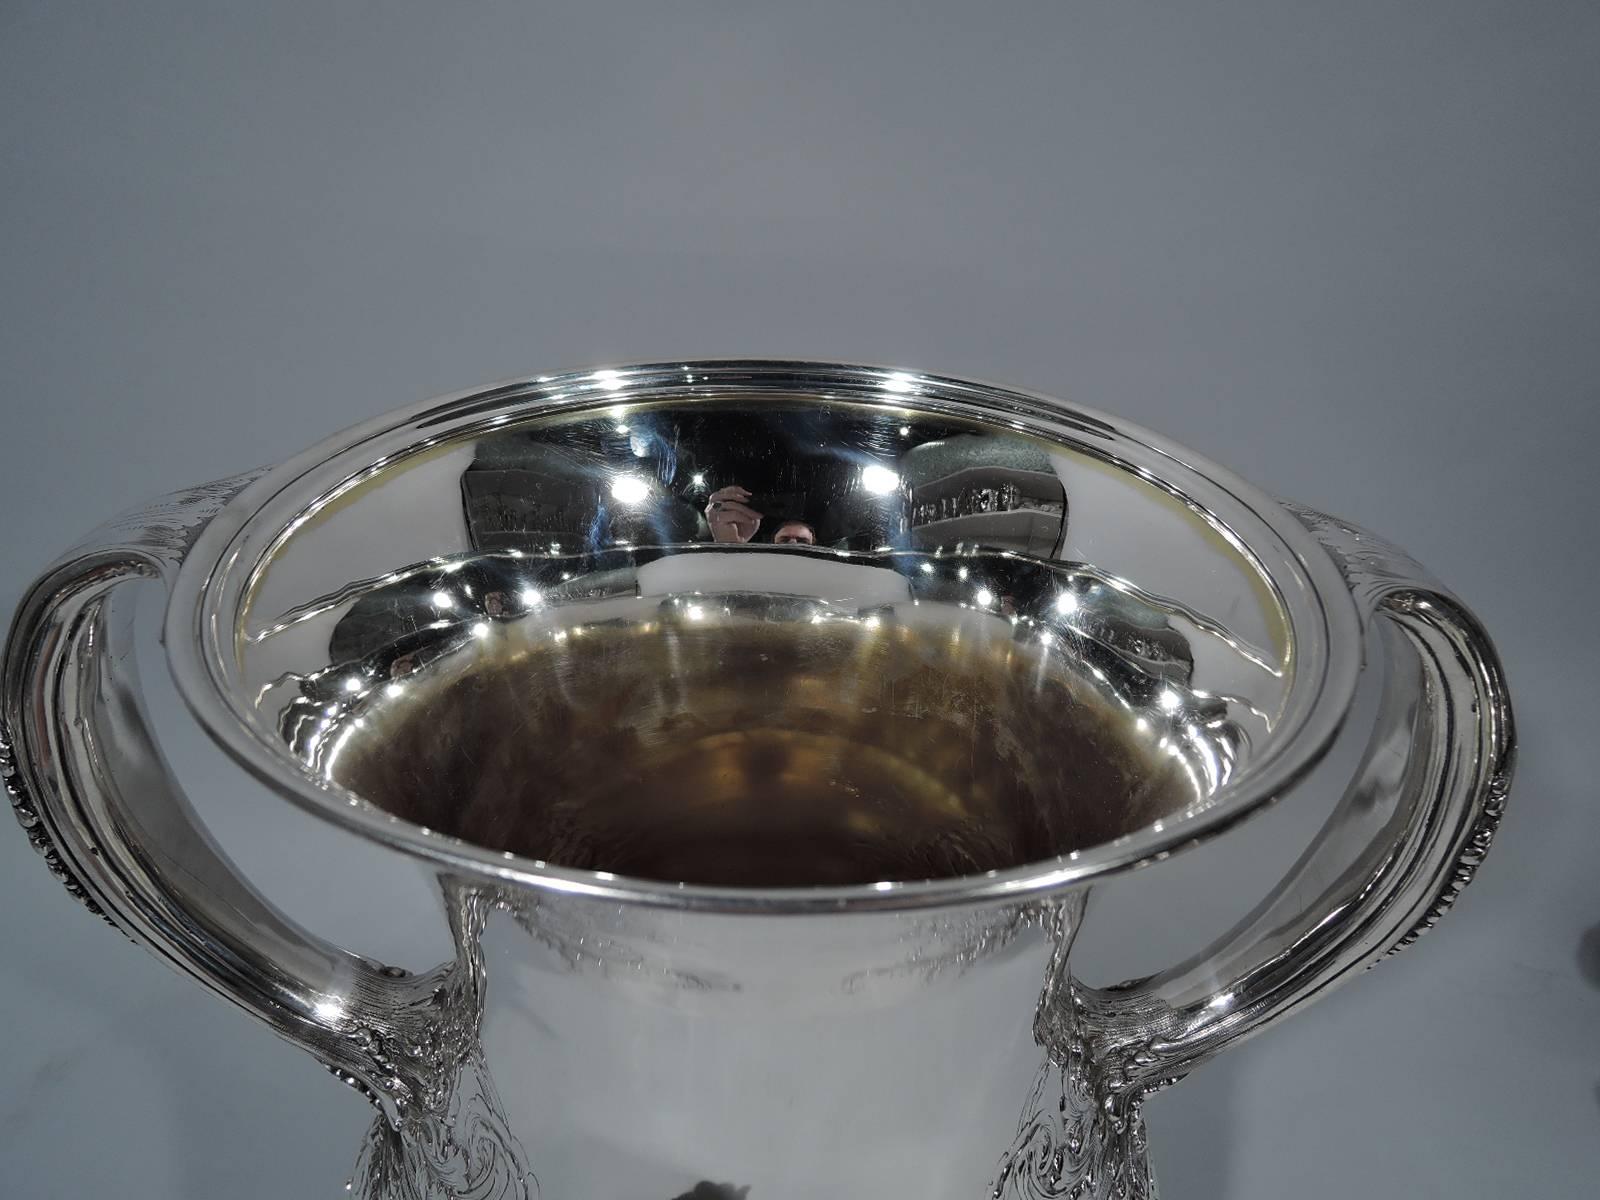 Large and heavy sterling silver trophy cup. Made by Tiffany & Co. in New York. Baluster bowl with raised foot, c-scroll handles, flared rim, and slashed lobbing. Handles reeded and leaf-capped, and have feathery leaf mounts. Gilt-washed interior. A